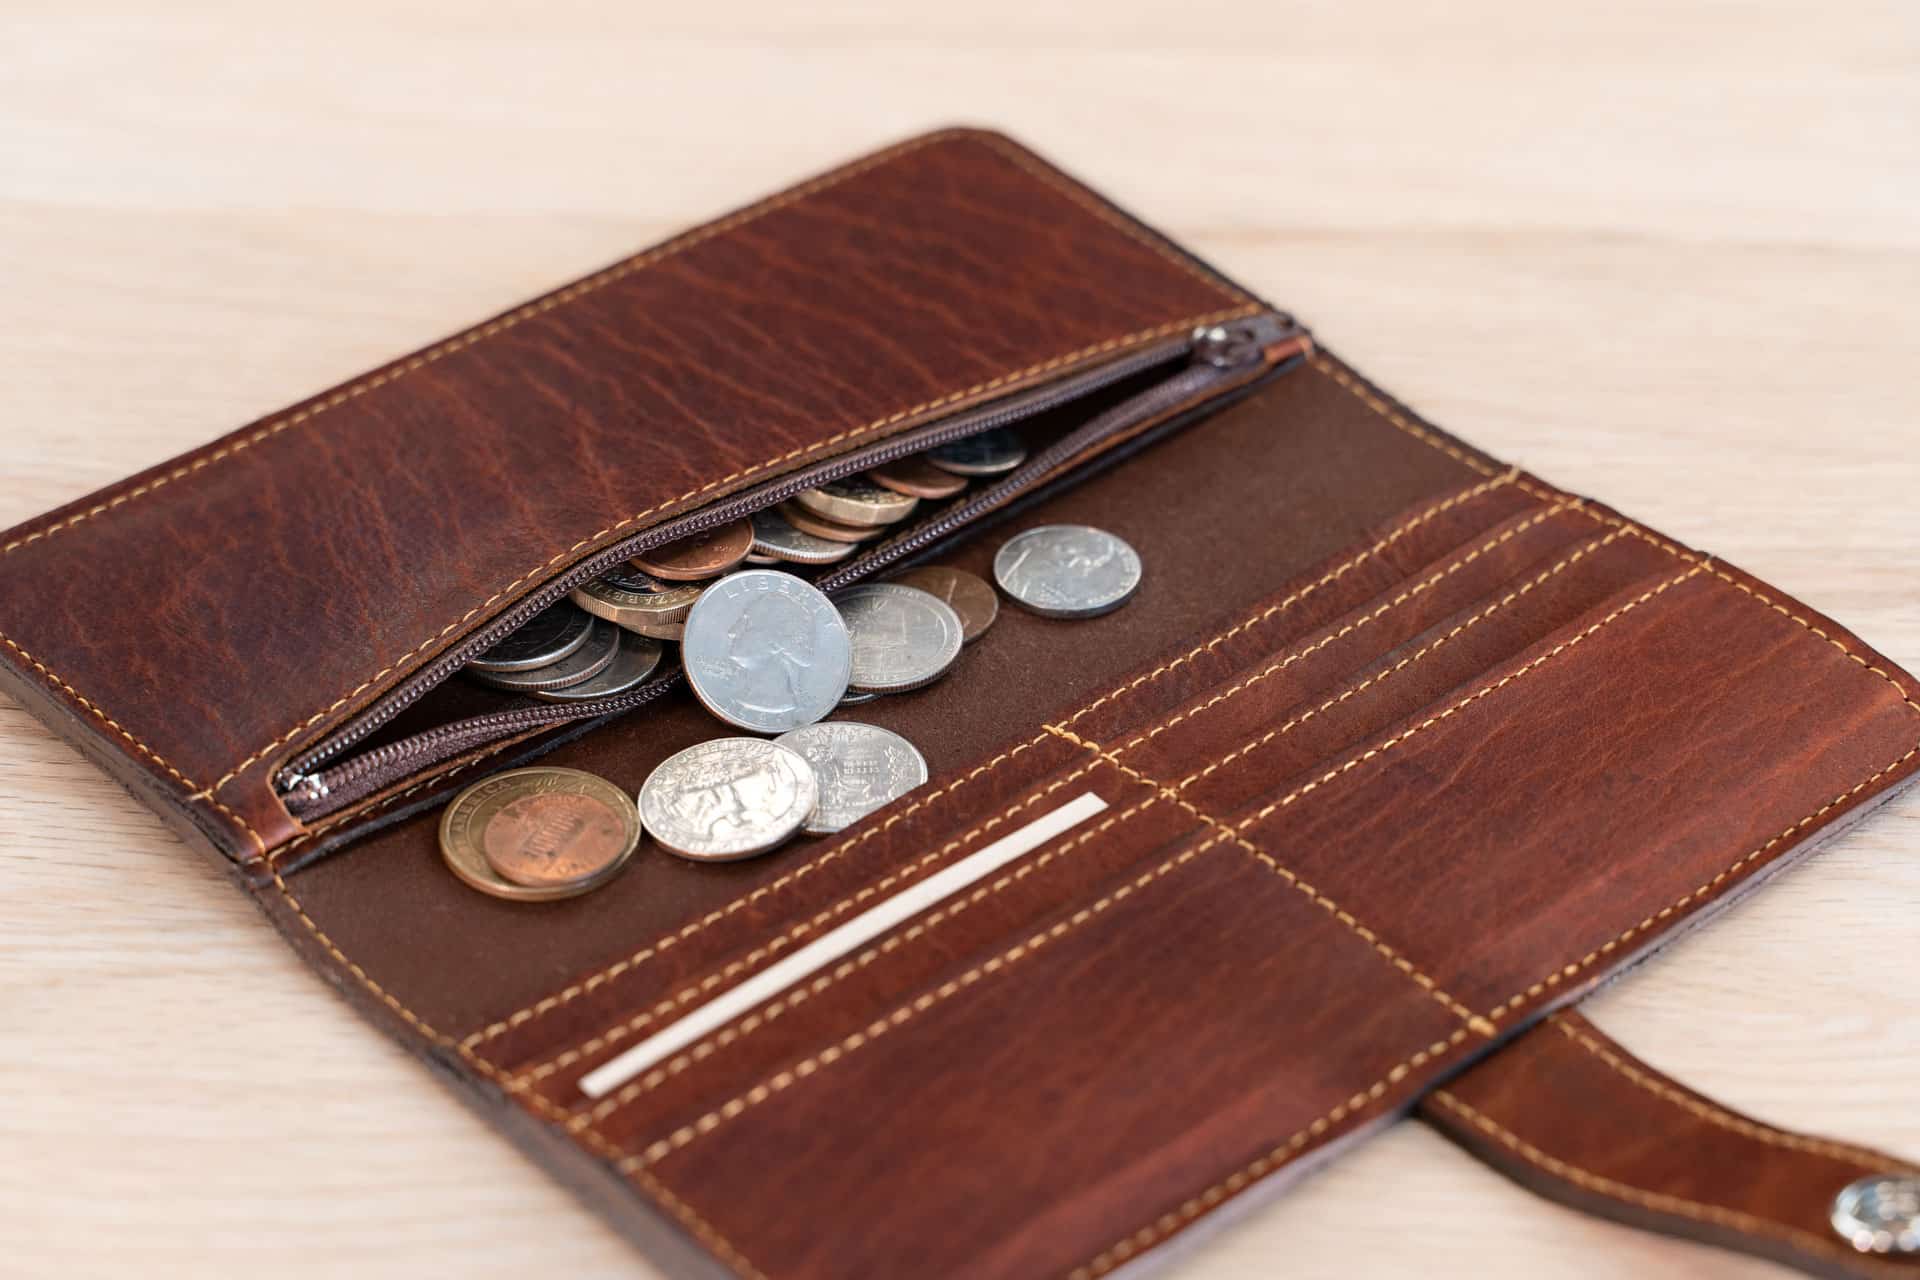 Coin Purse inside of the Slim Leather Wallet